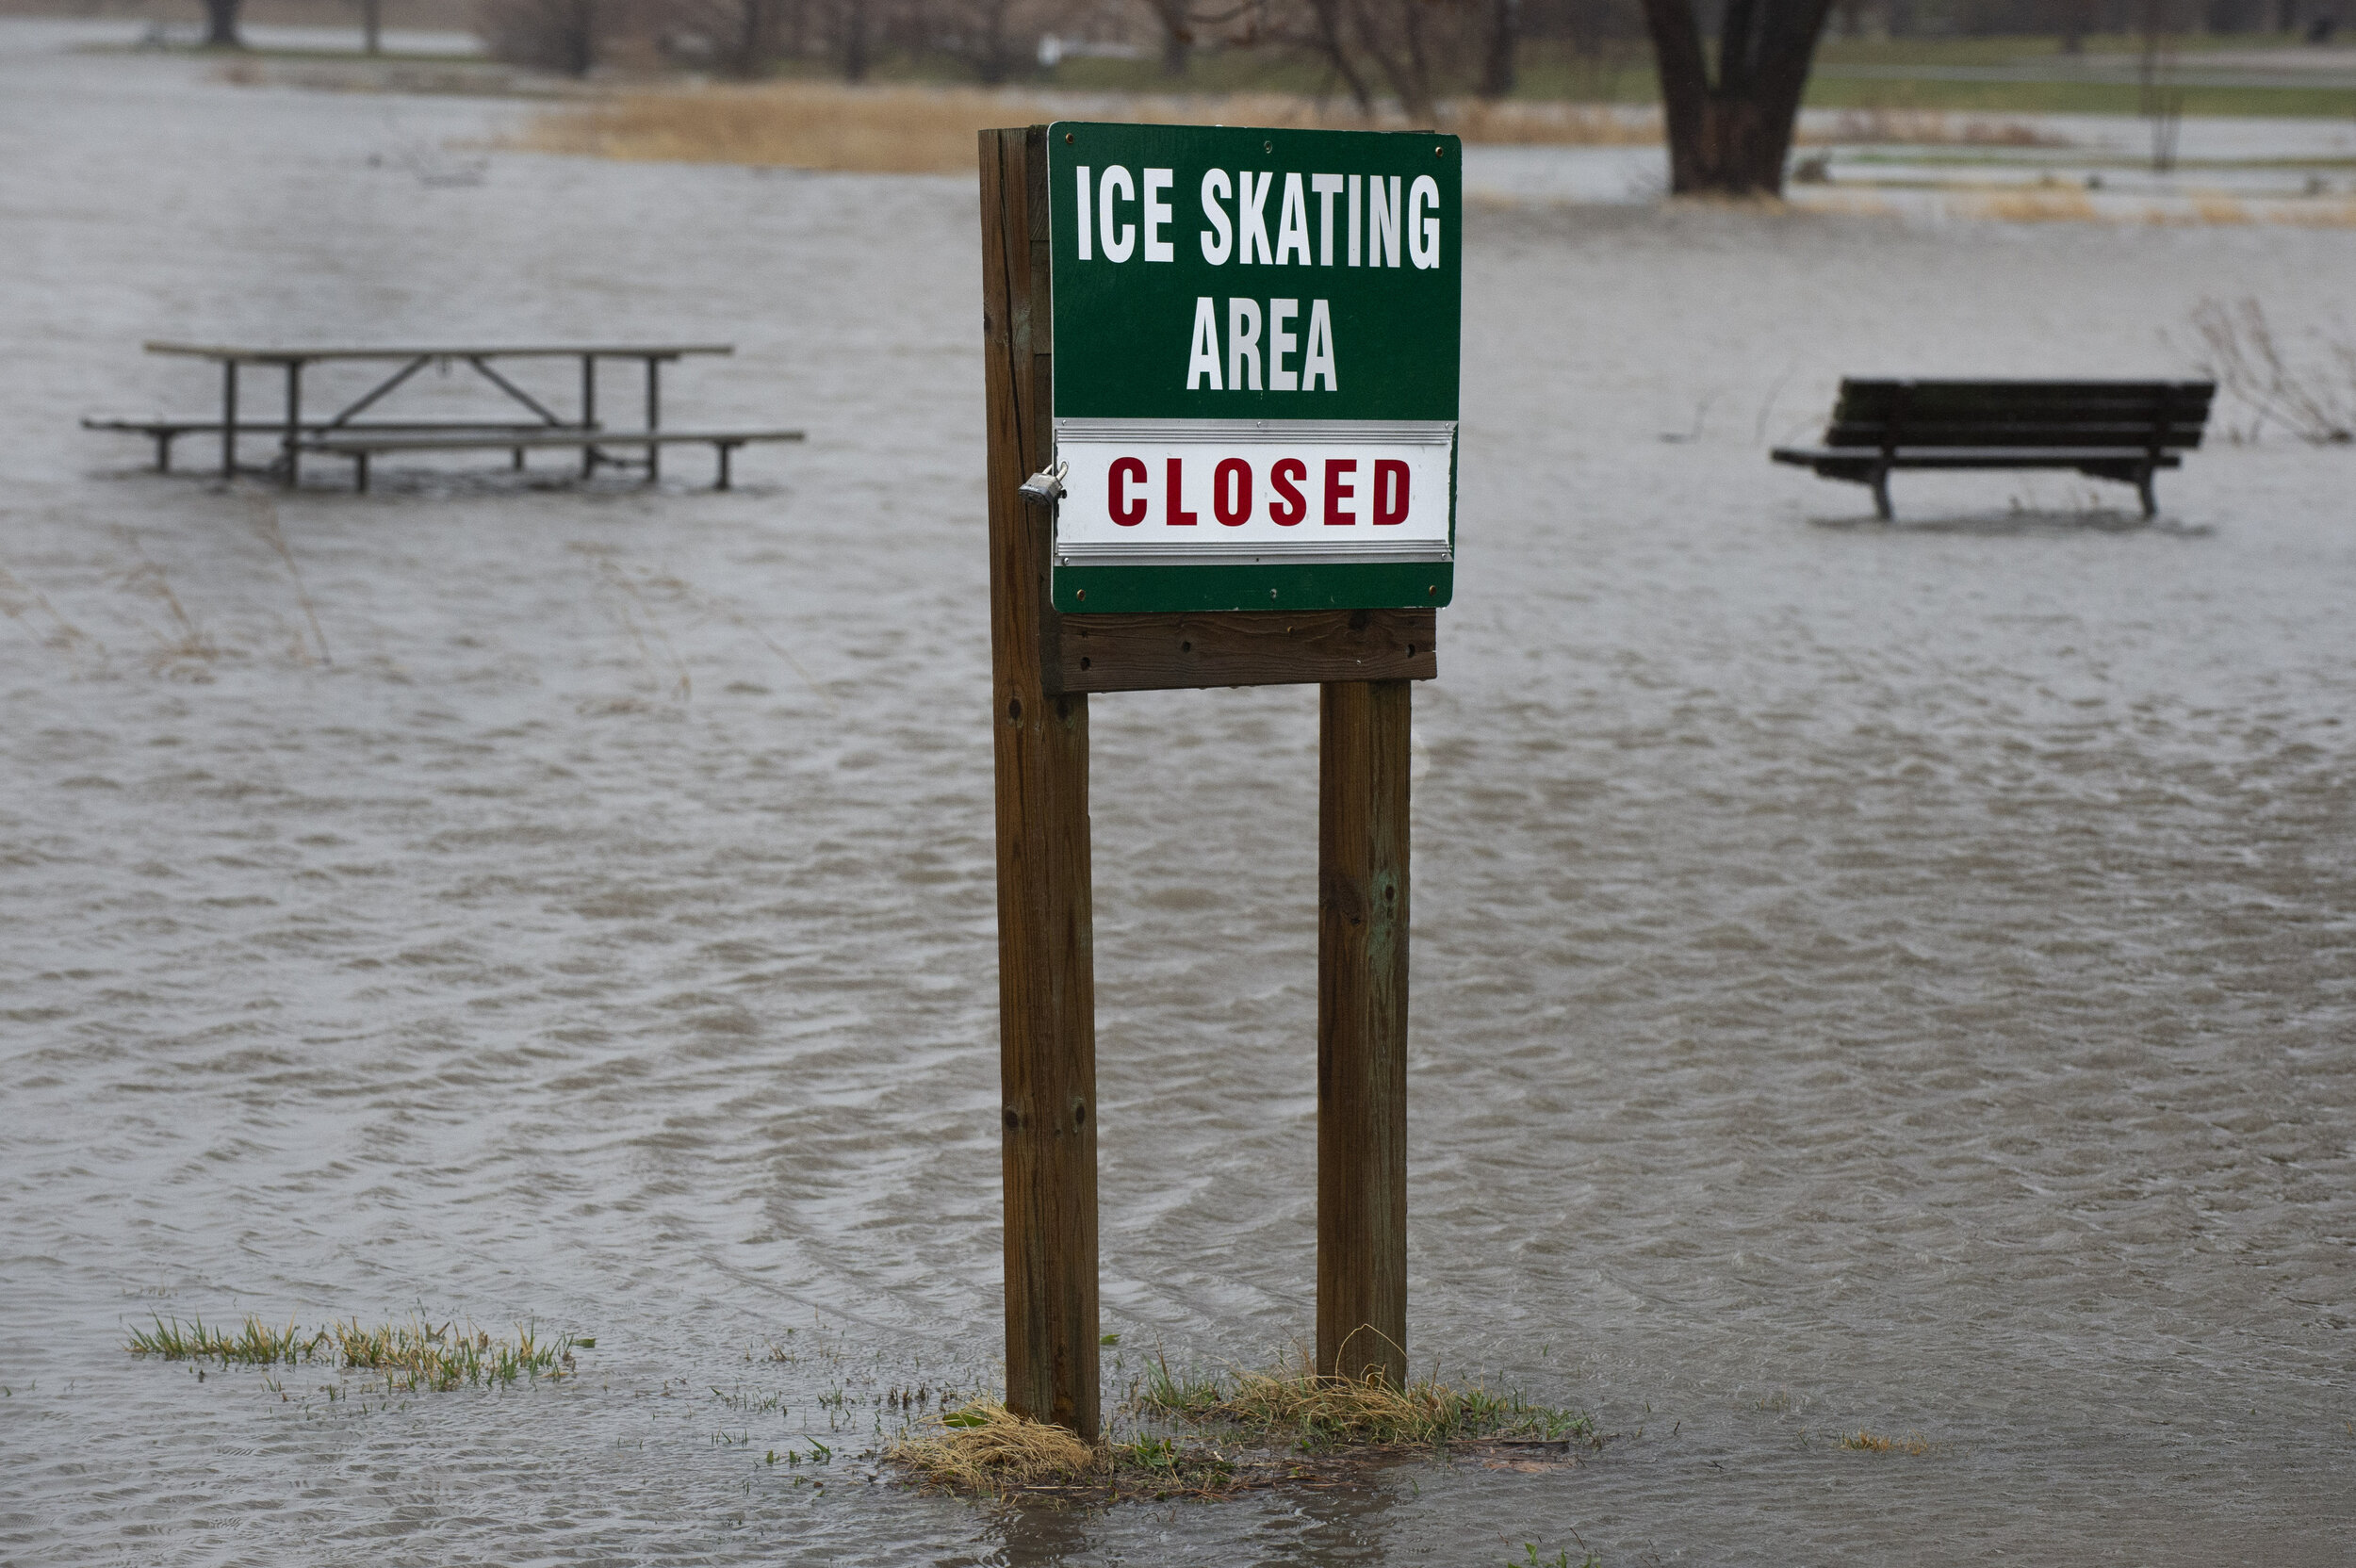  Benches are swallowed by the waters of Holmes Lake as the rain continued to fall, Sunday, March 14, 2021. Spring showers began sweeping through Lincoln late Saturday evening, carrying over into a melancholy Sunday. Rain and strong winds kept many in